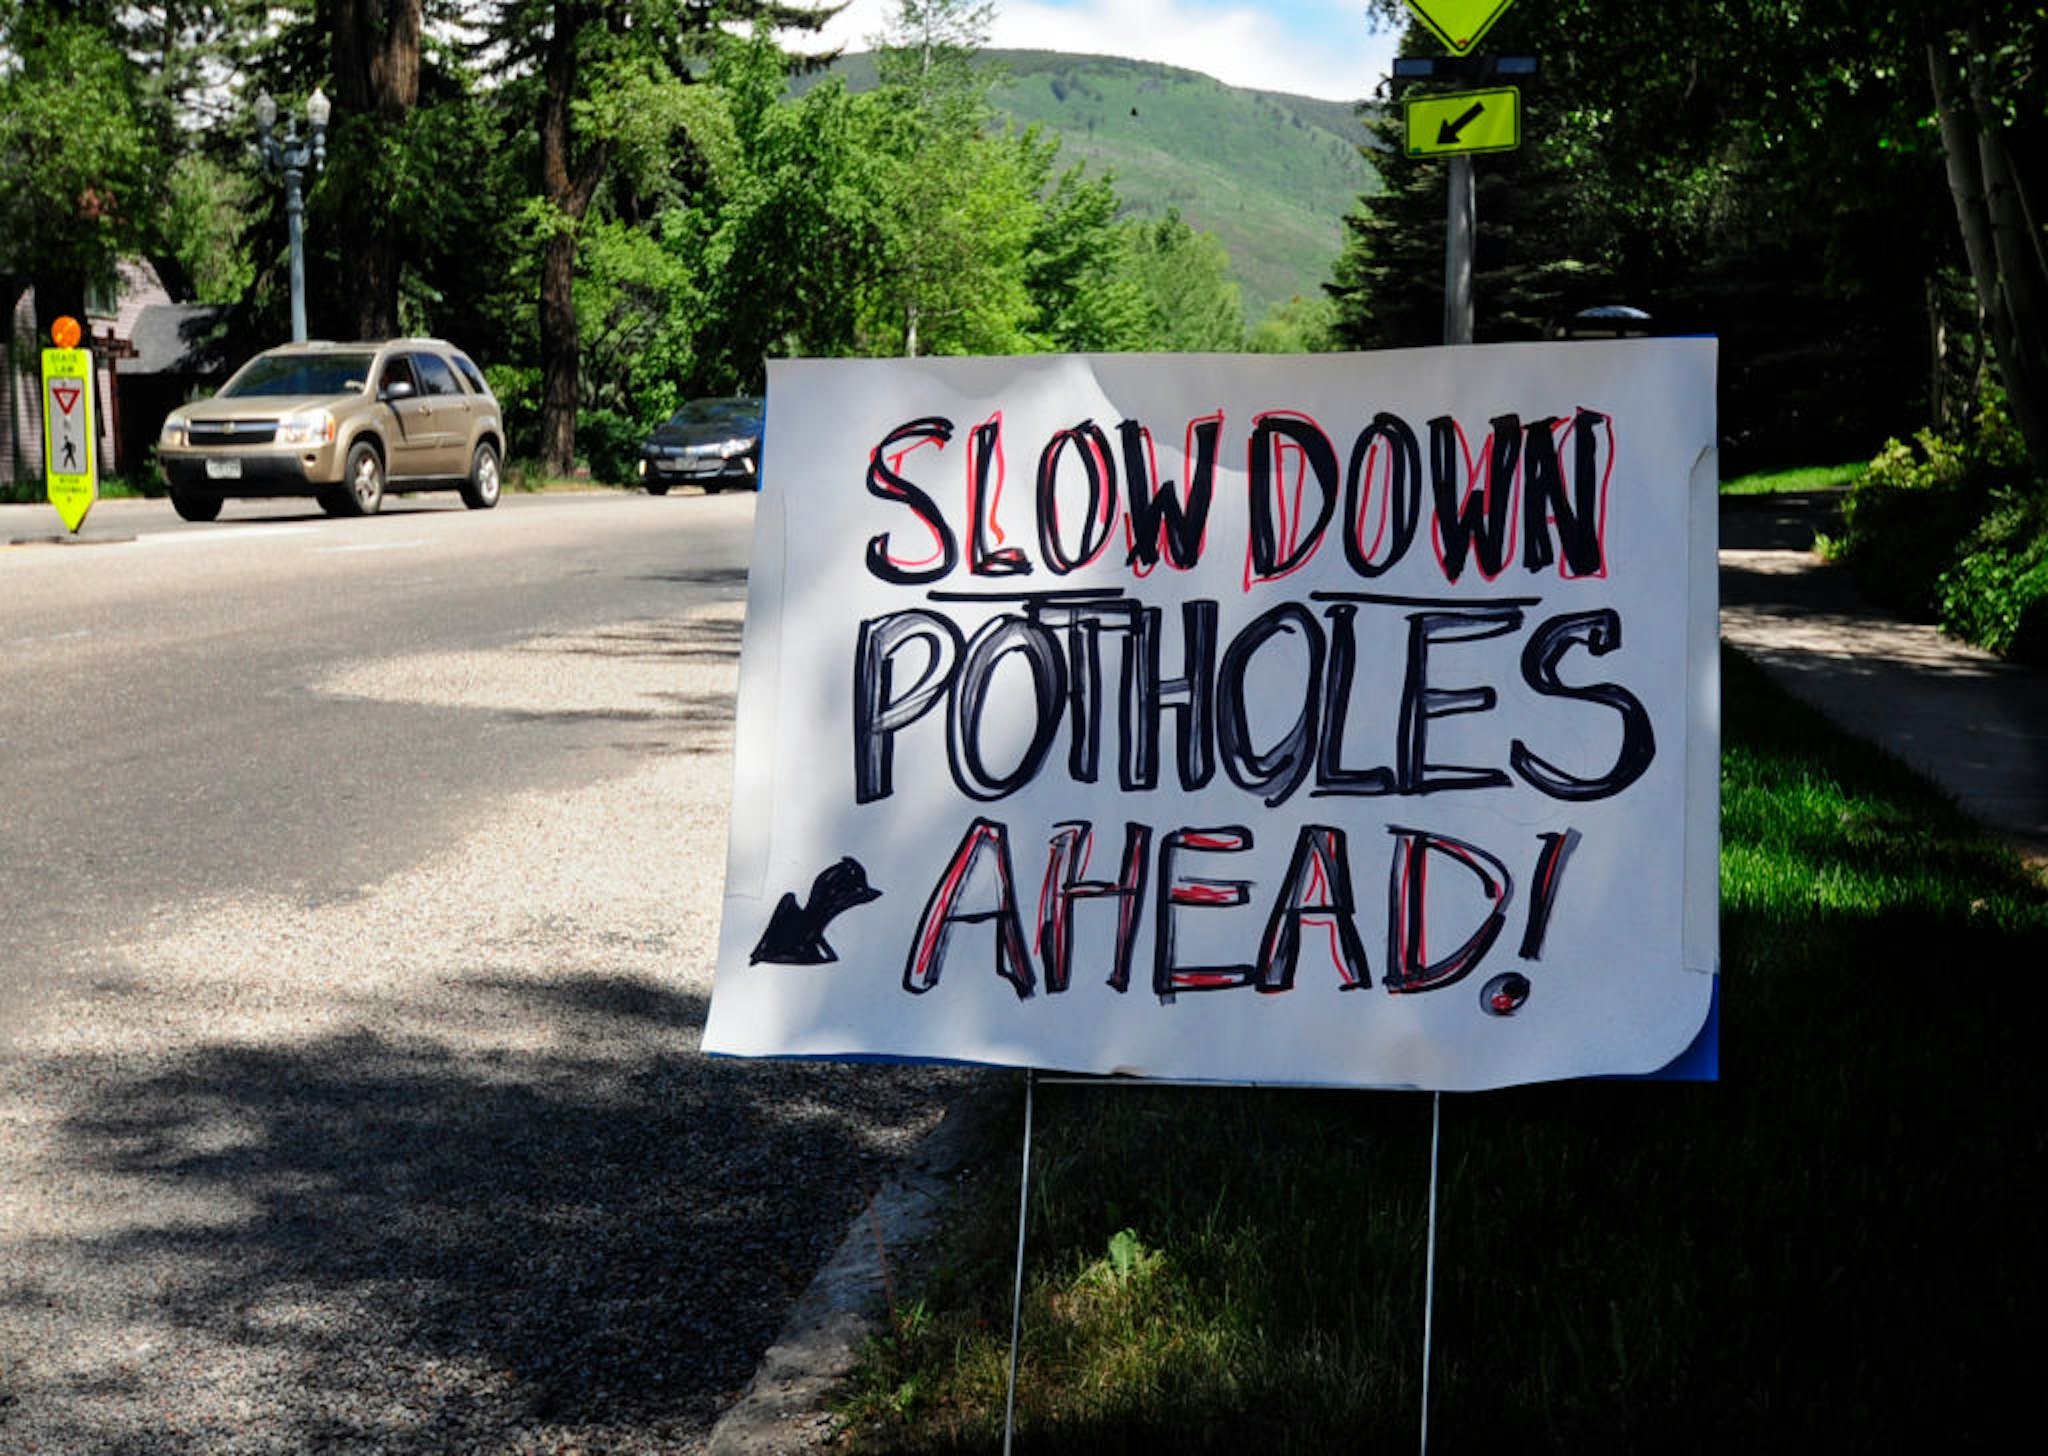 ASPEN, CO - JUNE 11, 2017: A hand-lettered, homemade sign posted beside an Aspen, Colorado, street warns motorists that there are pot holes ahead.